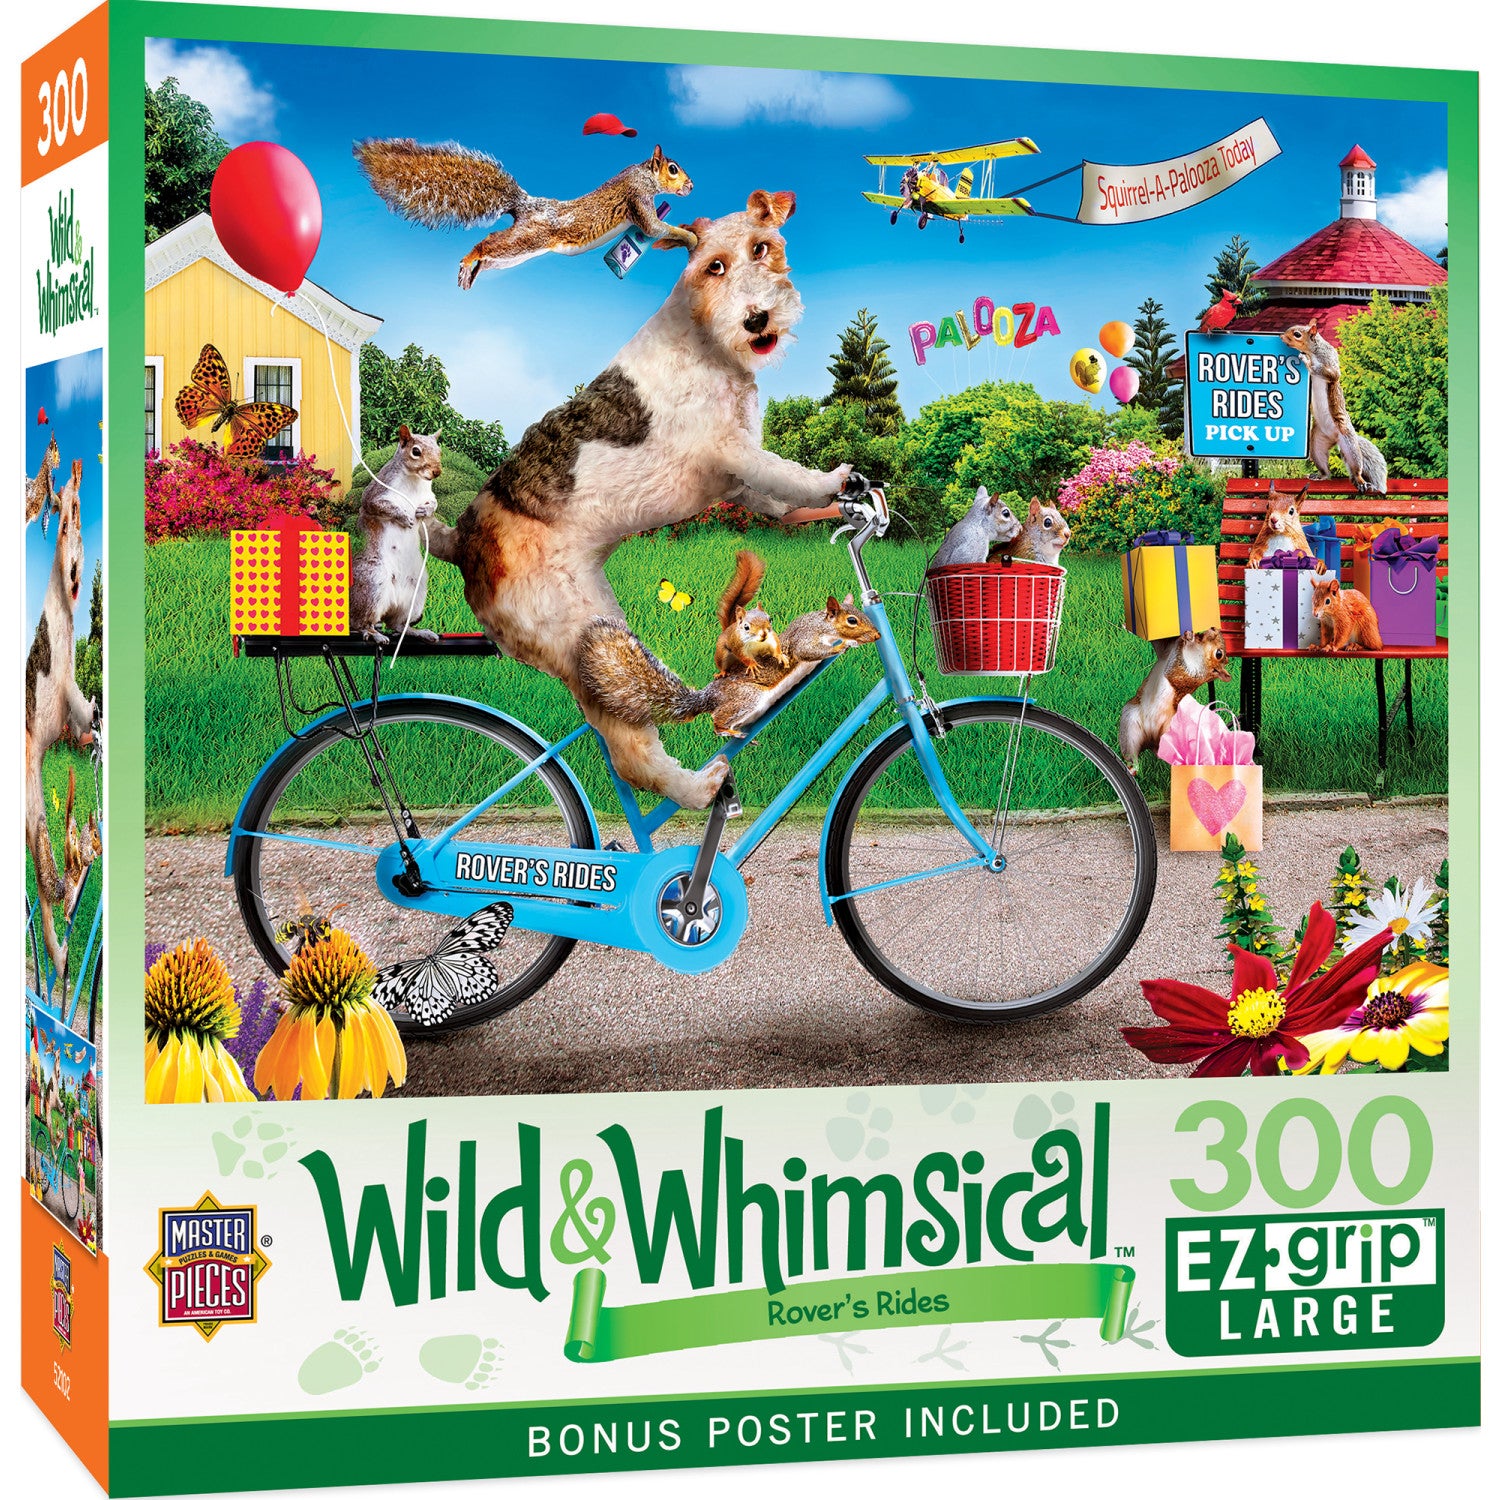 Wild & Whimsical - Rovers Rides 300 Piece Puzzle